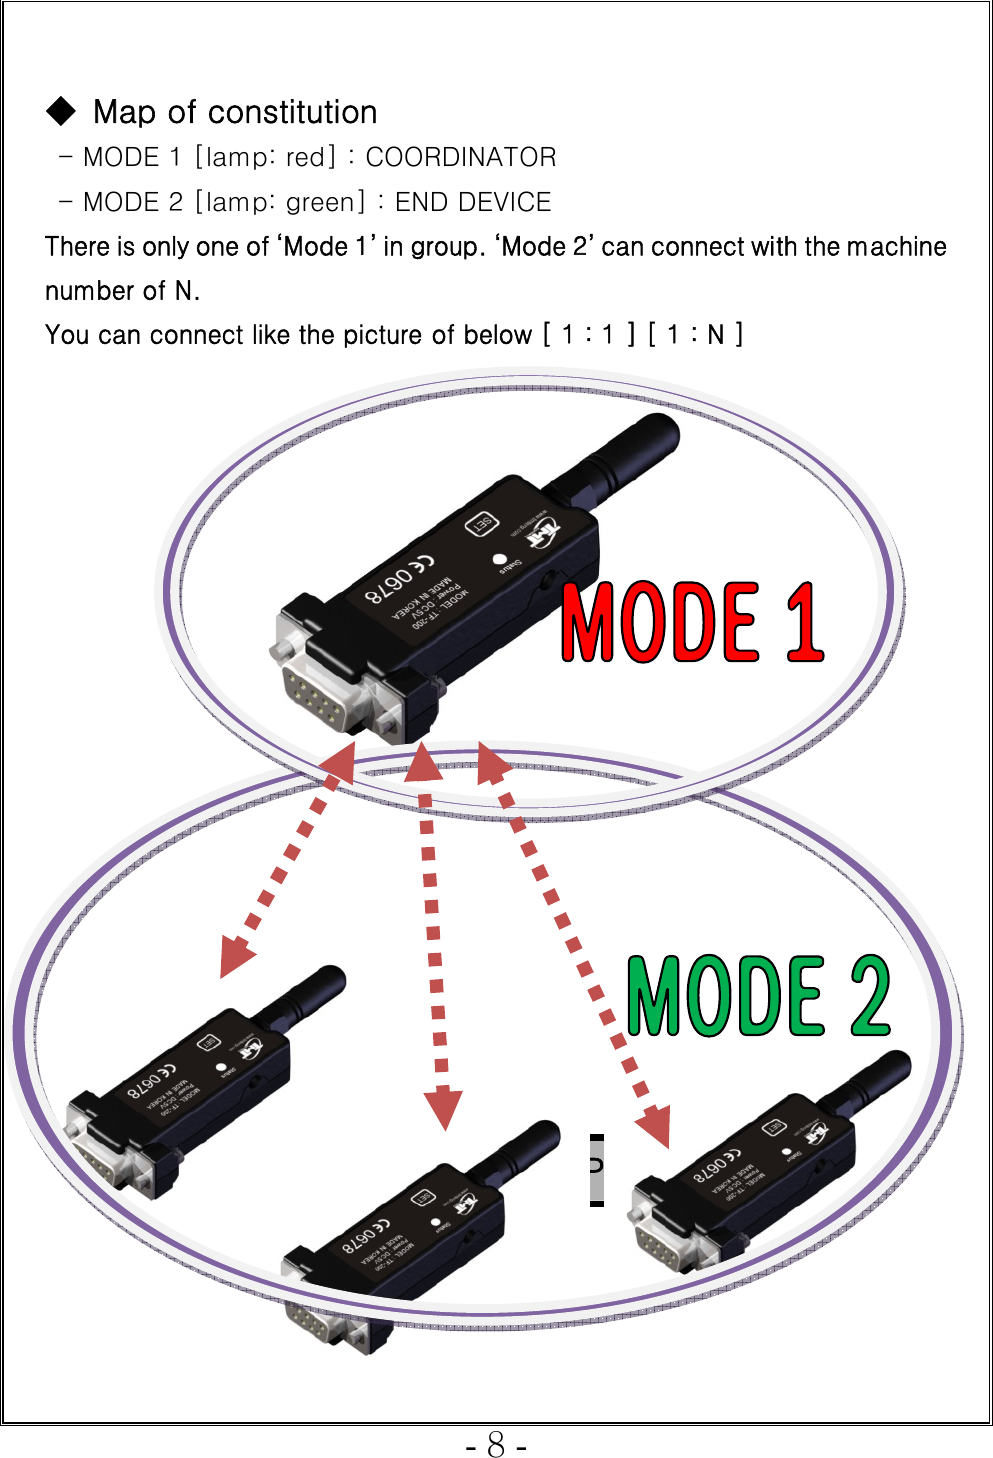  - 8 -  ◆  Map of constitution   - MODE 1 [lamp: red] : COORDINATOR - MODE 2 [lamp: green] : END DEVICE There is only one of ‘Mode 1’ in group. ‘Mode 2’ can connect with the machine number of N. You can connect like the picture of below [ 1 : 1 ] [ 1 : N ]                      F. SETTING A WIRELESS GROUP     